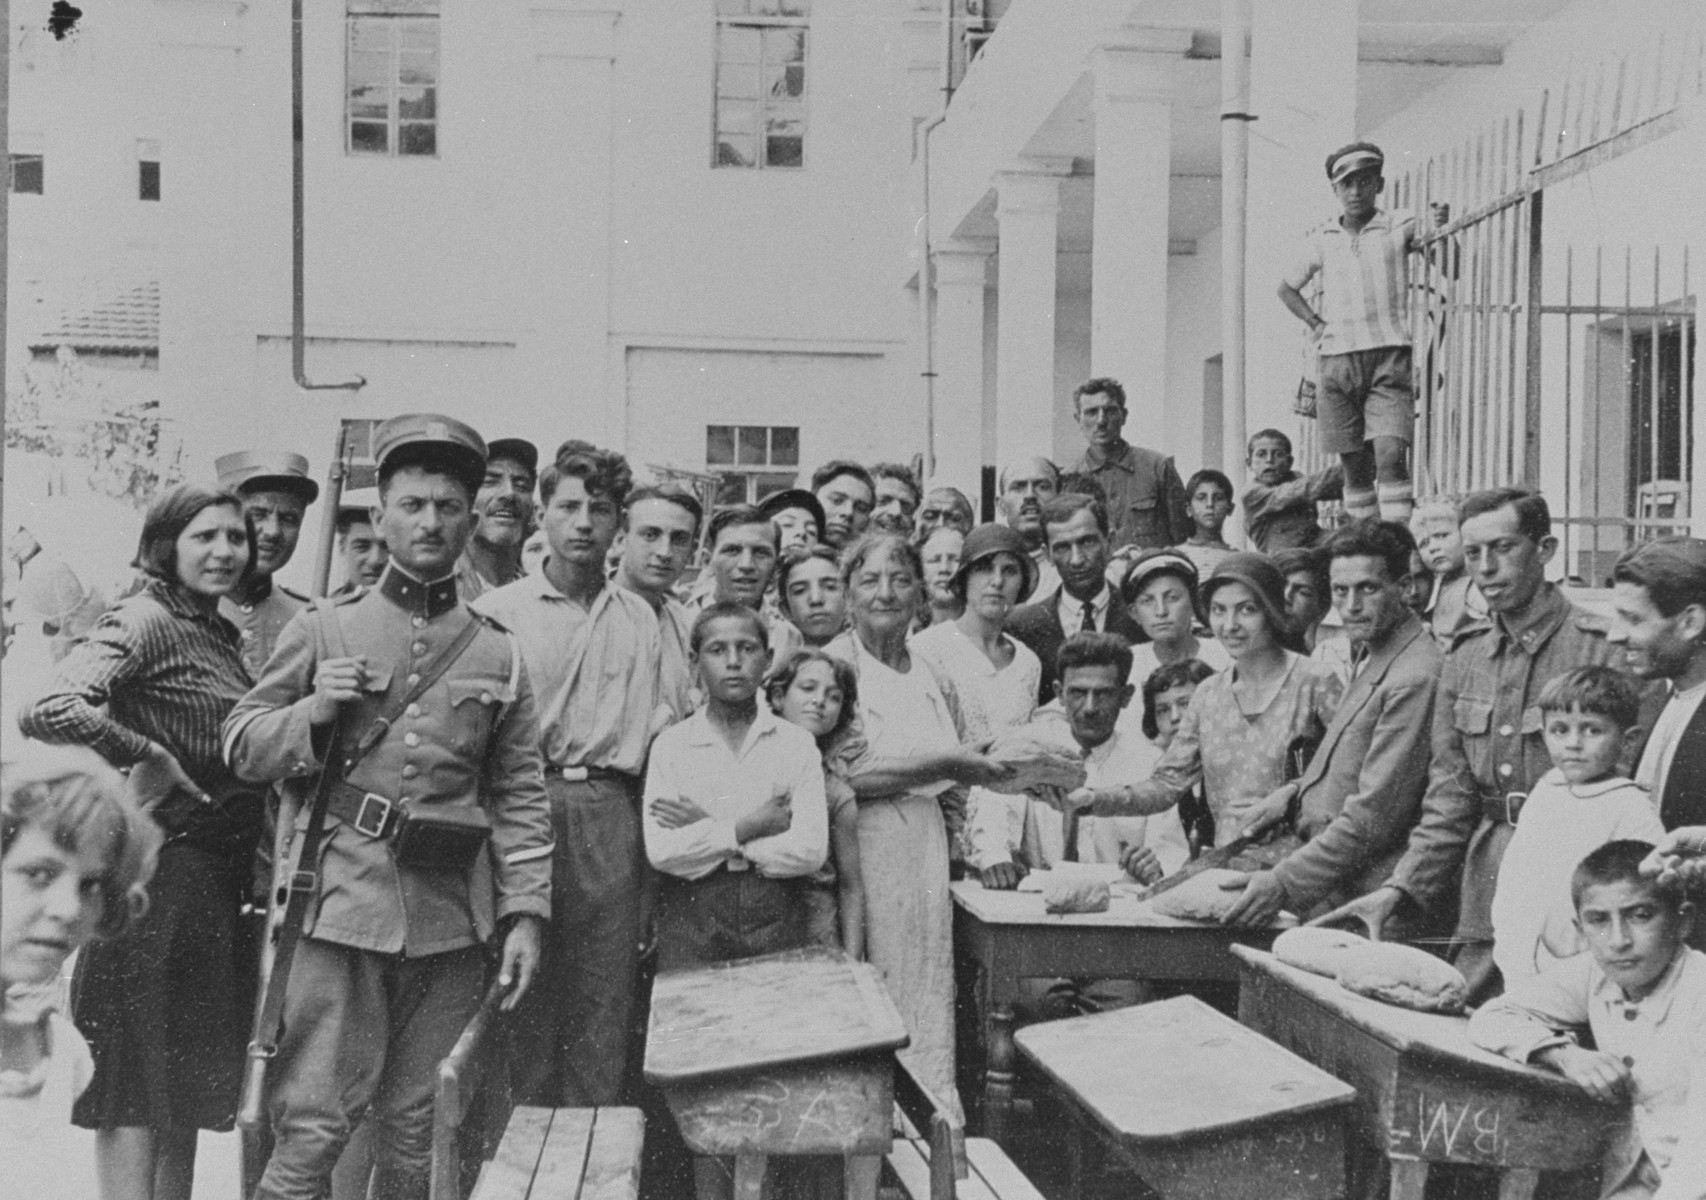 Jews take refuge in one of the local schools after a pogrom destroyed their community.